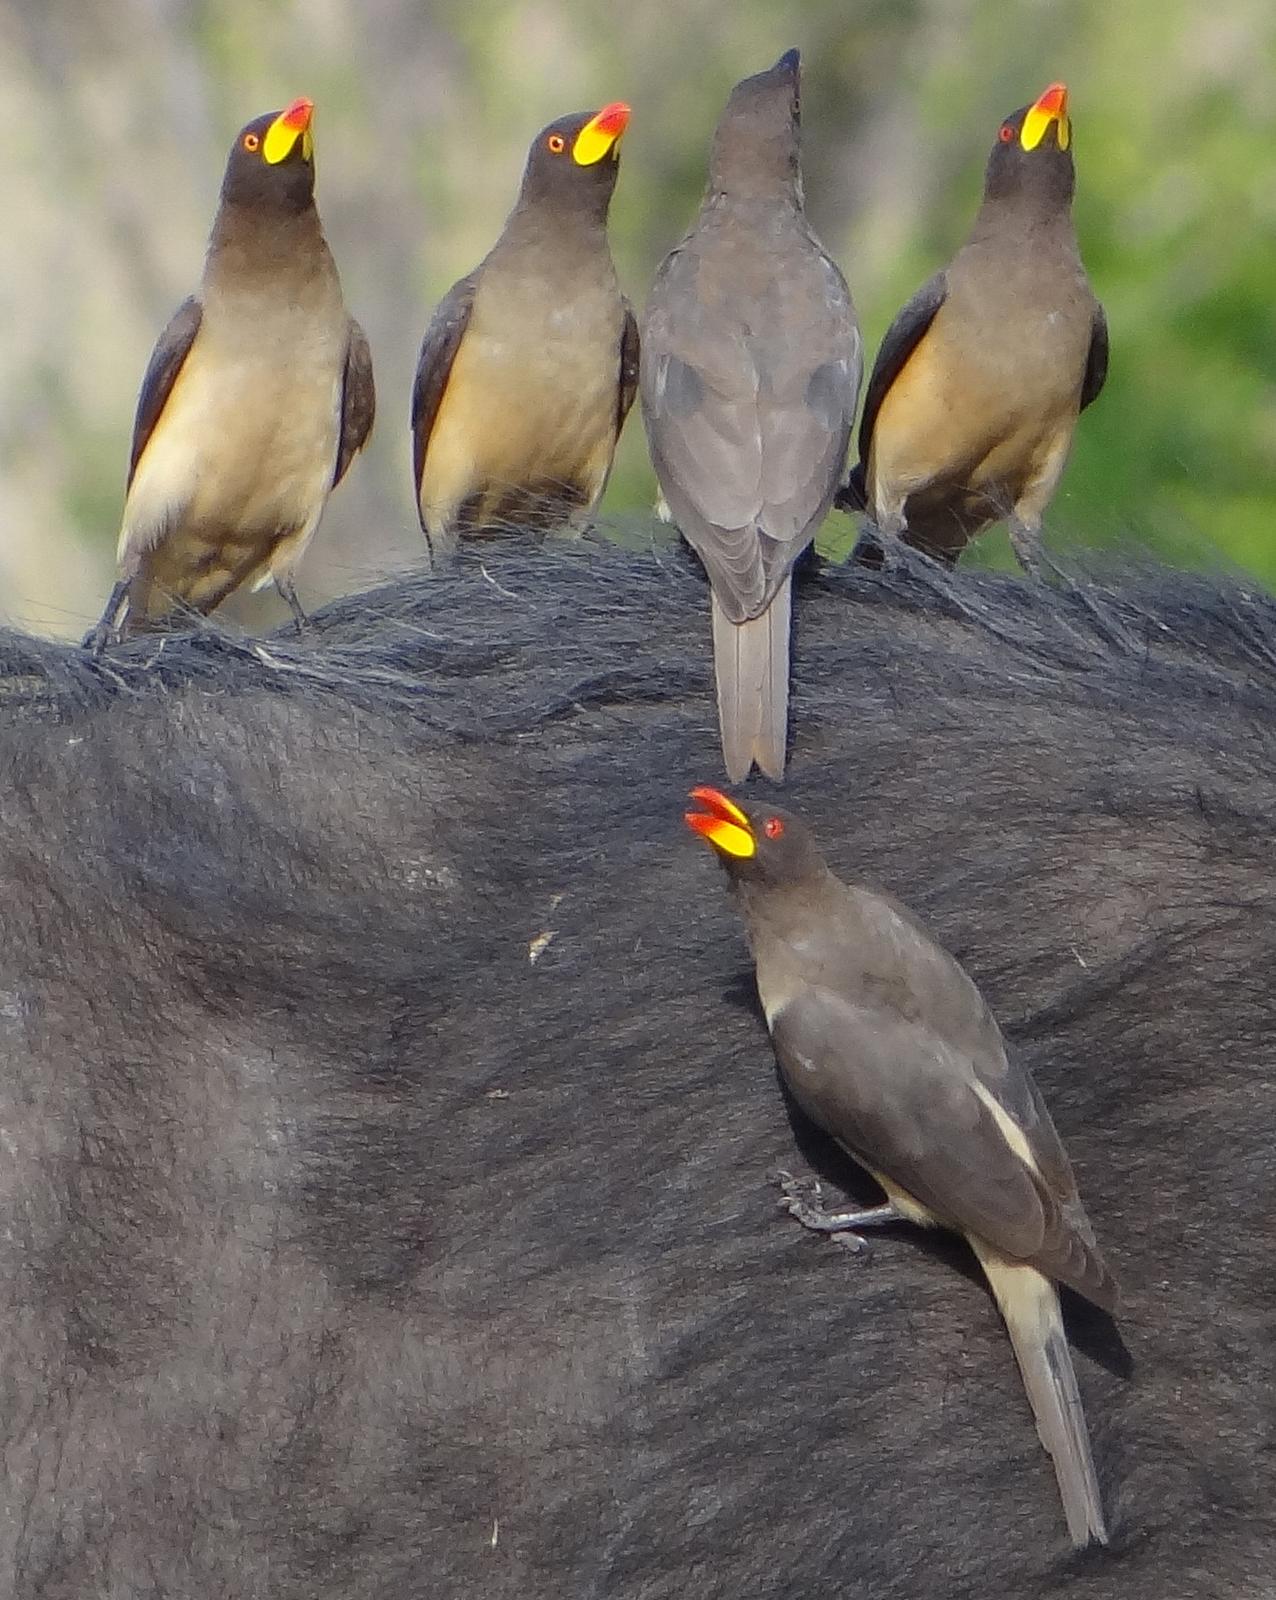 Yellow-billed Oxpecker Photo by Todd A. Watkins